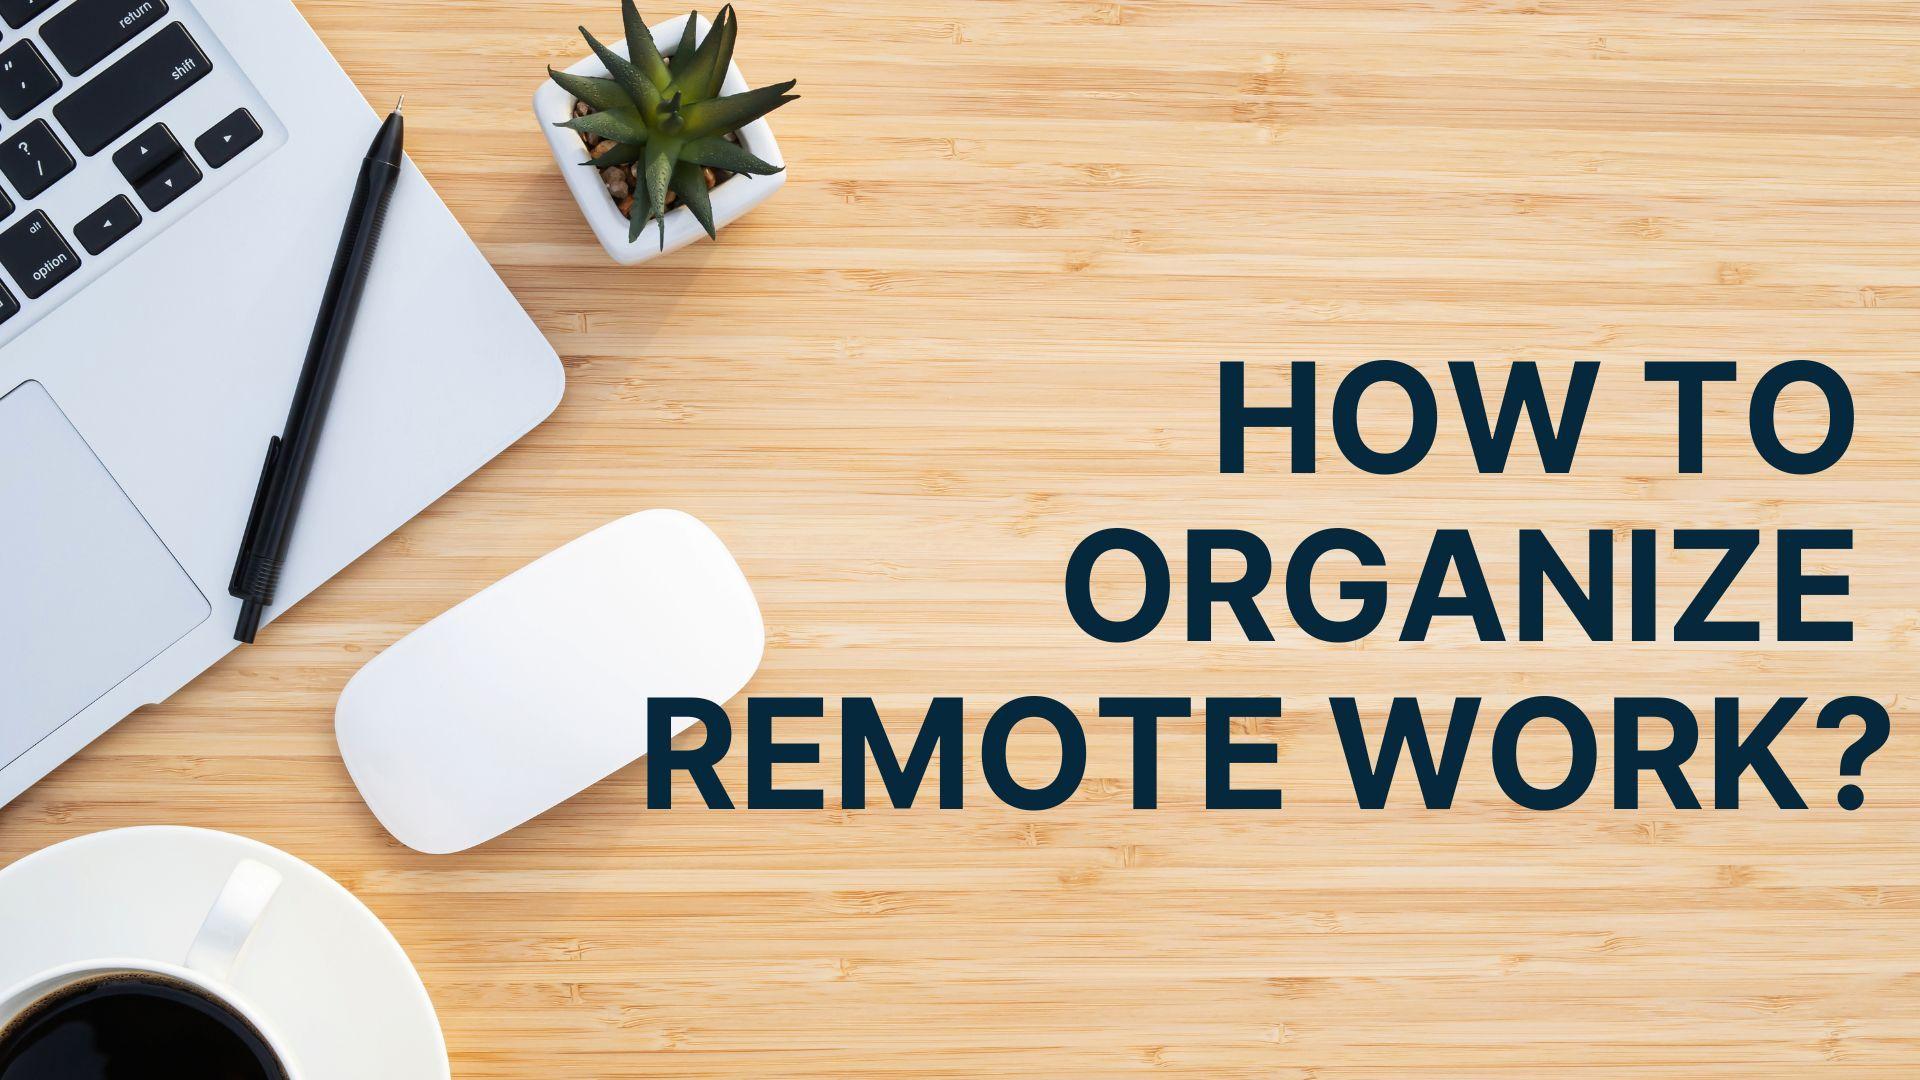 How to organize remote work?